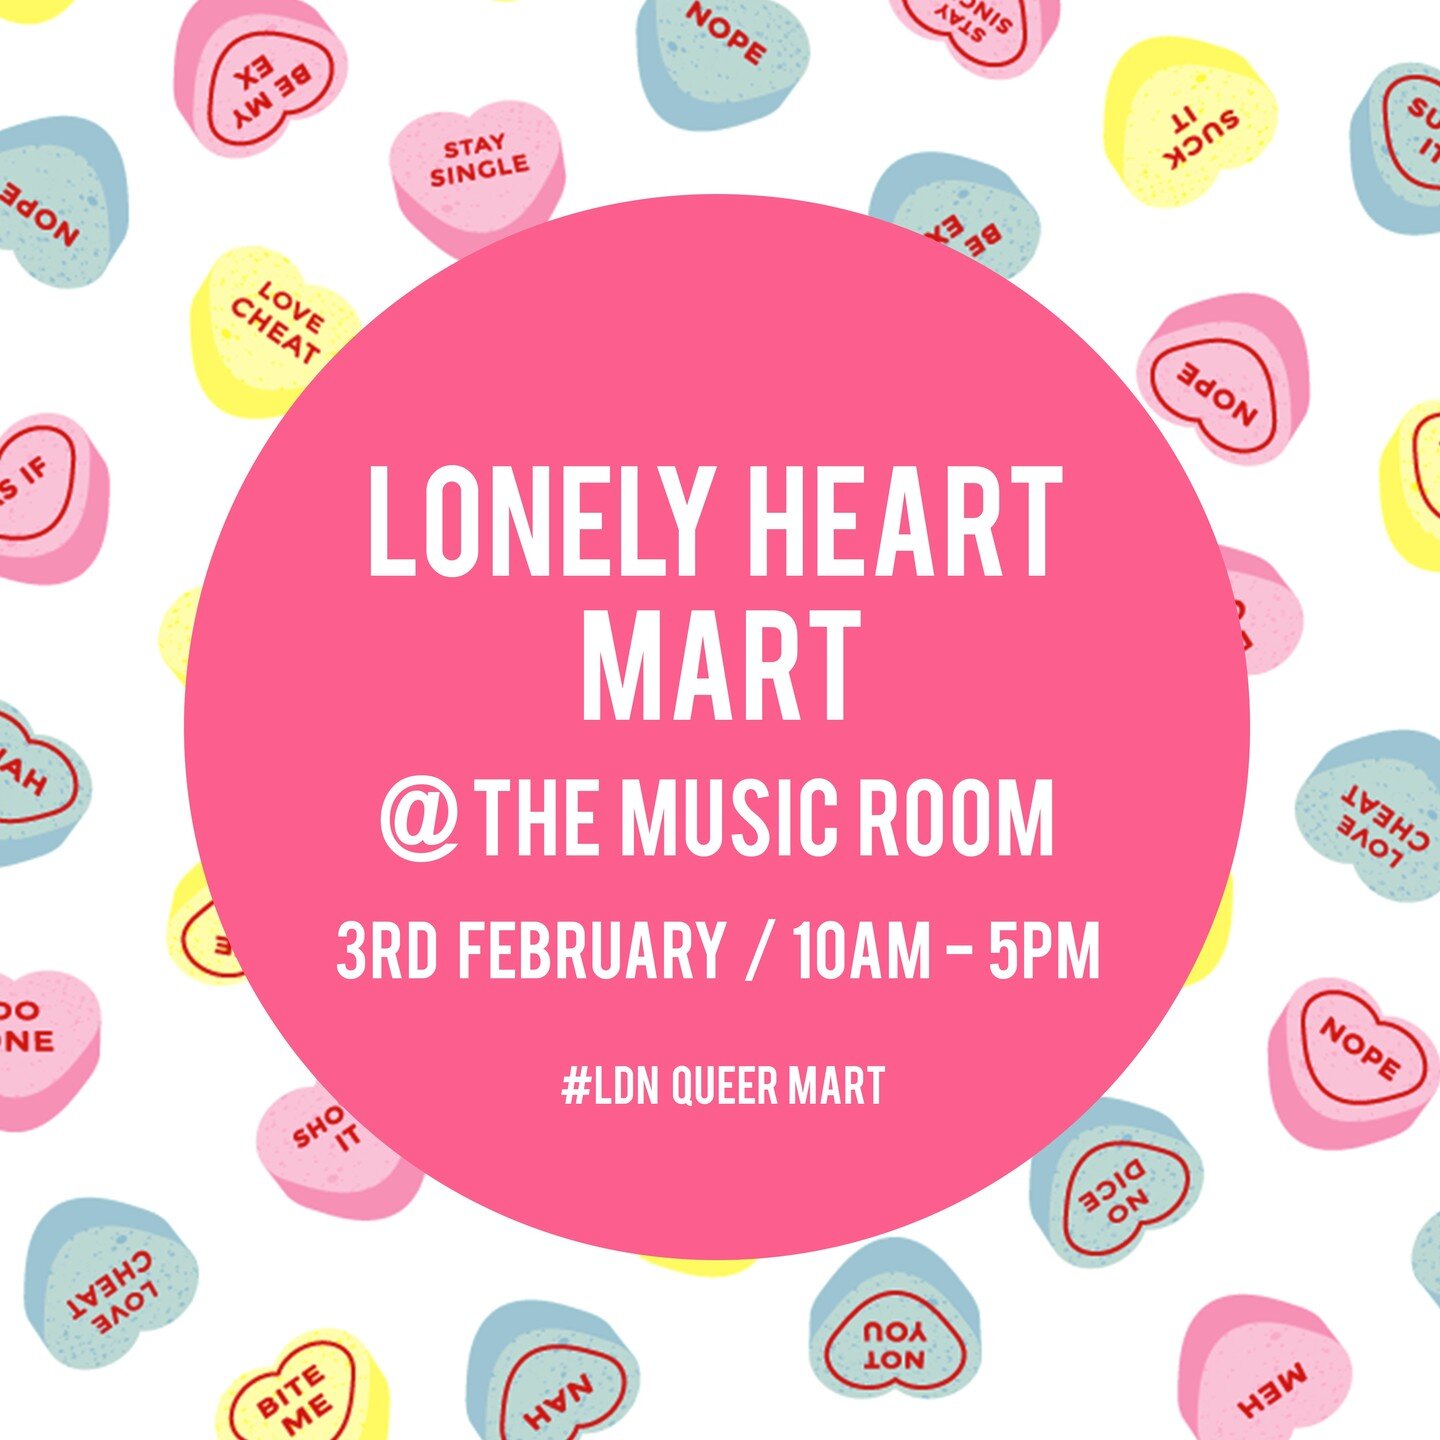 🌟1ST MARKET OF THE YEAR!🌟 
LET'S GO, LOVES!

Pro or anti-Valentines Day? 
February 3rd, come down to: 
The Music Room, 
116-118 New Cross Rd, 
London SE14 5BA 

...and pick up queer art, stickers, apparel, stationery, a person...Two people? Three p